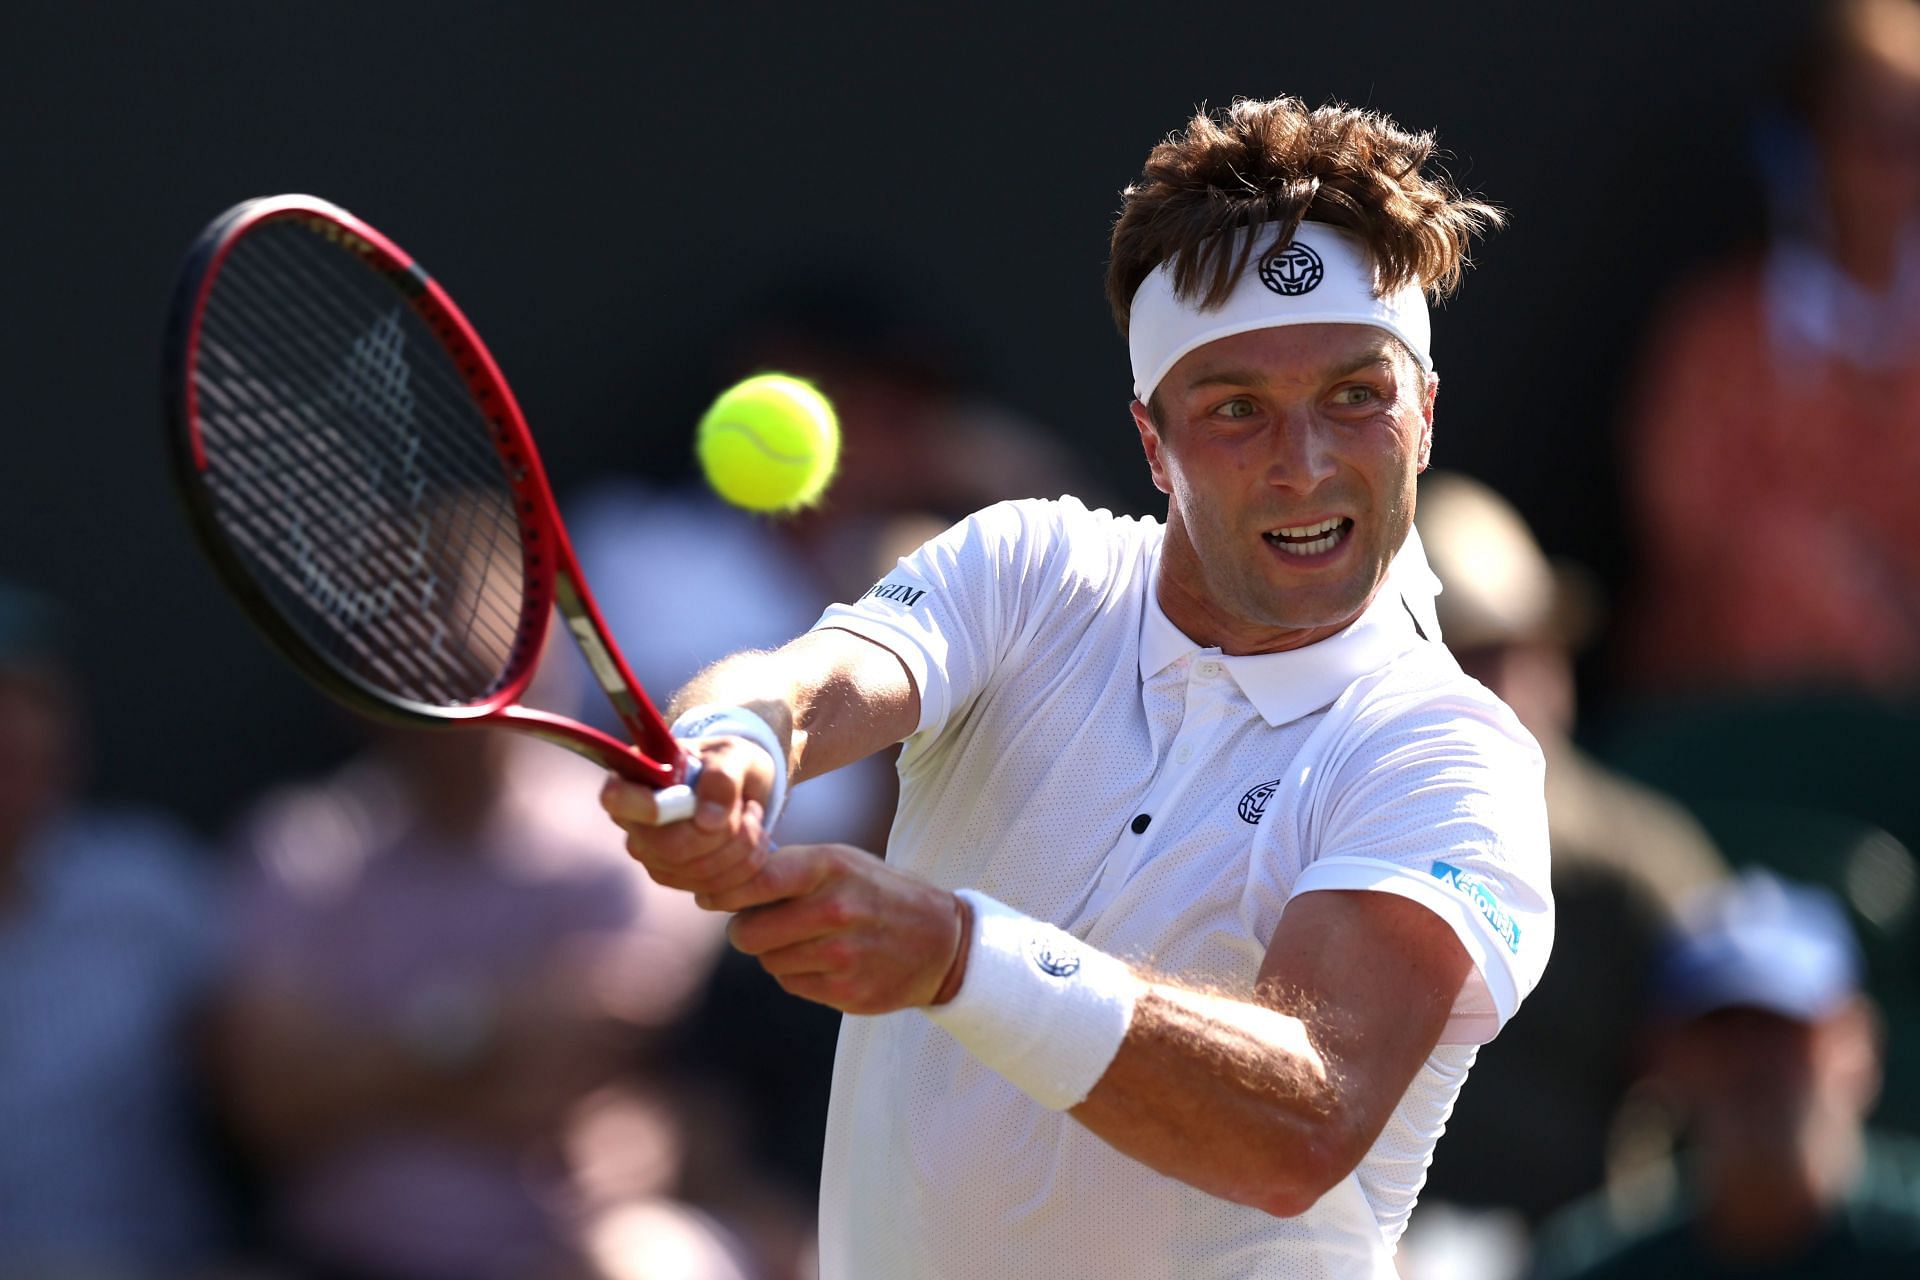 Liam Broady in action at the 2023 Wimbledon Championships.